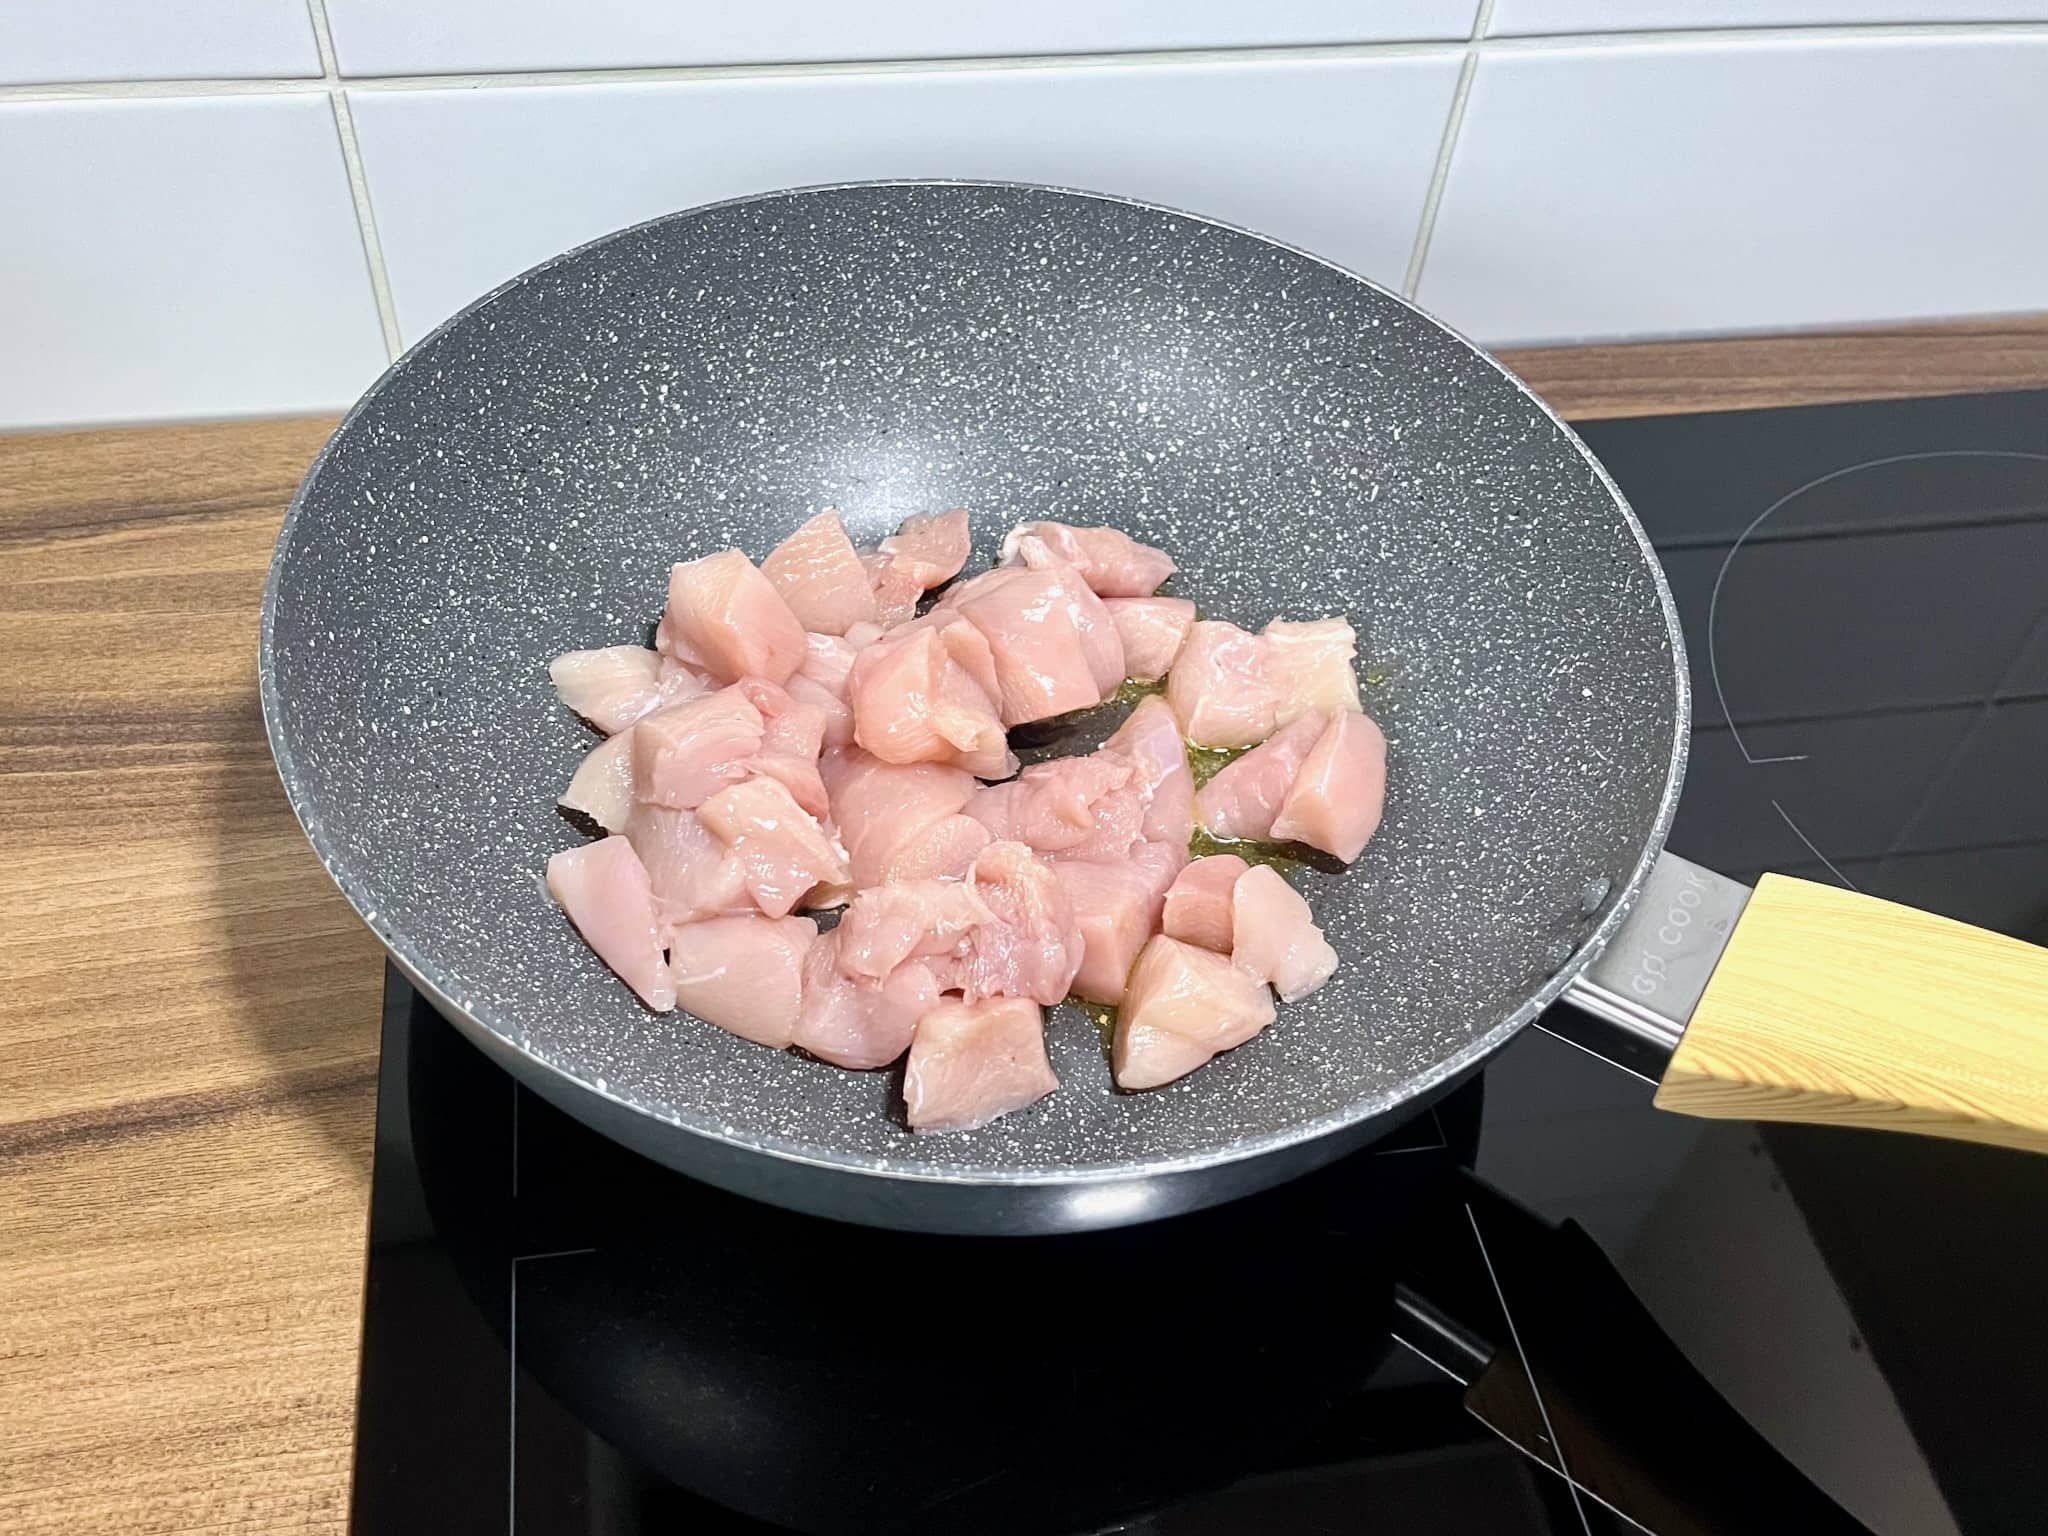 Fry the chicken breasts in a pan